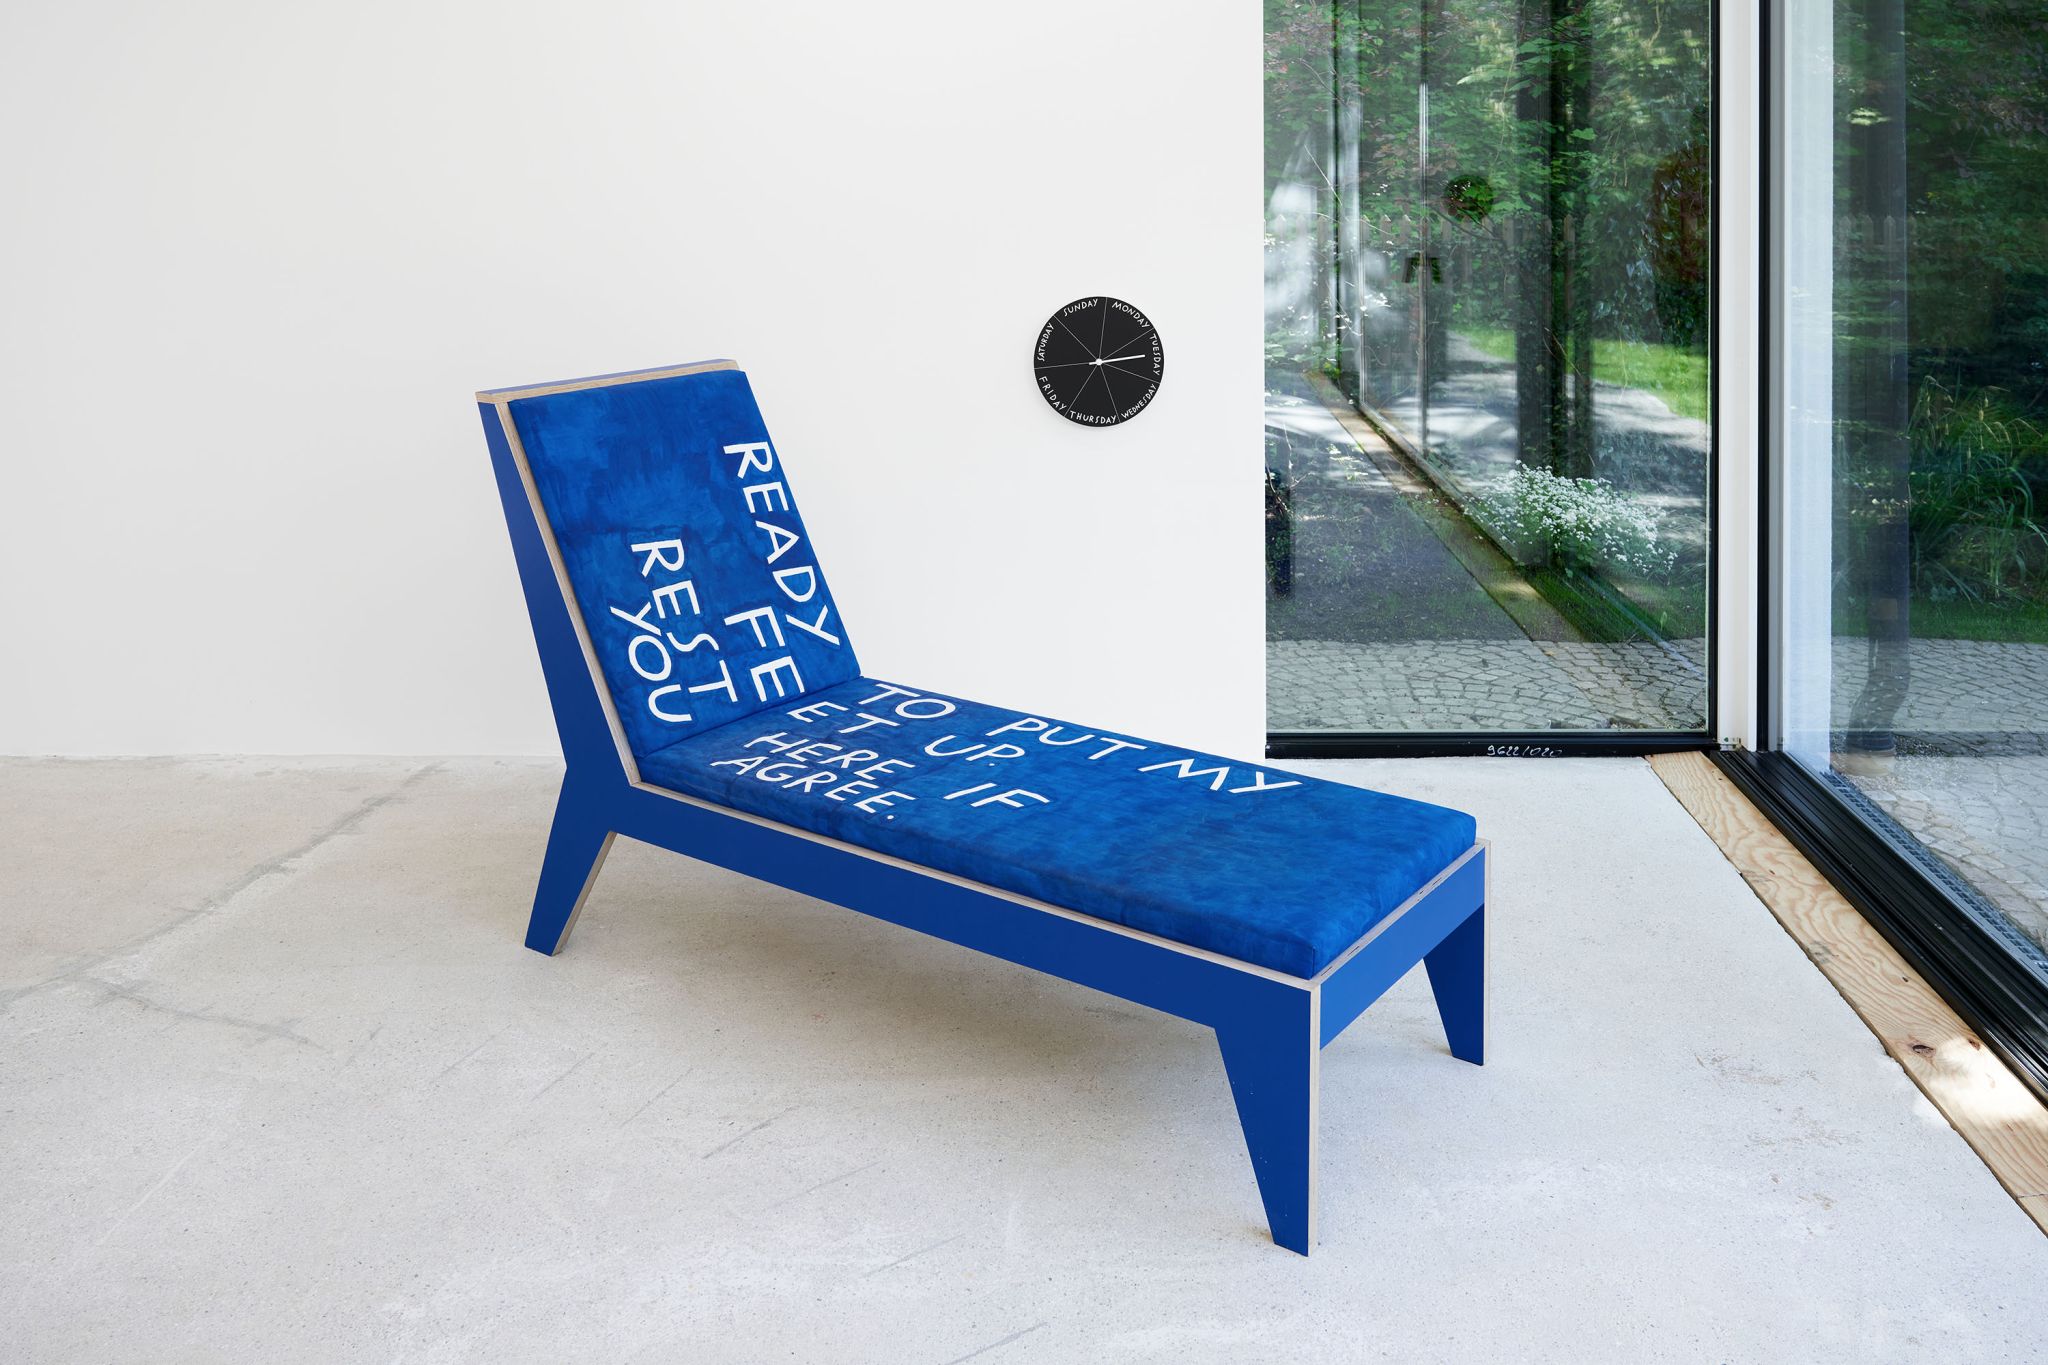 Finnegan Shannon, Do you want us here or not (MMK) – Chaise lounge 2, 2021, Plywood, paint, foam, fabric, fabric paint, 110.5 ⁠× ⁠190 ⁠× ⁠68.5 ⁠⁠cm, Image description: A blue chaise lounge with white letters on it in an exhibition room. The letters read “Ready to put my feet up. Rest here if you agree.” The chaise lounge is facing out of the big window with views of a lush garden. A black Day Clock is hanging next to it.